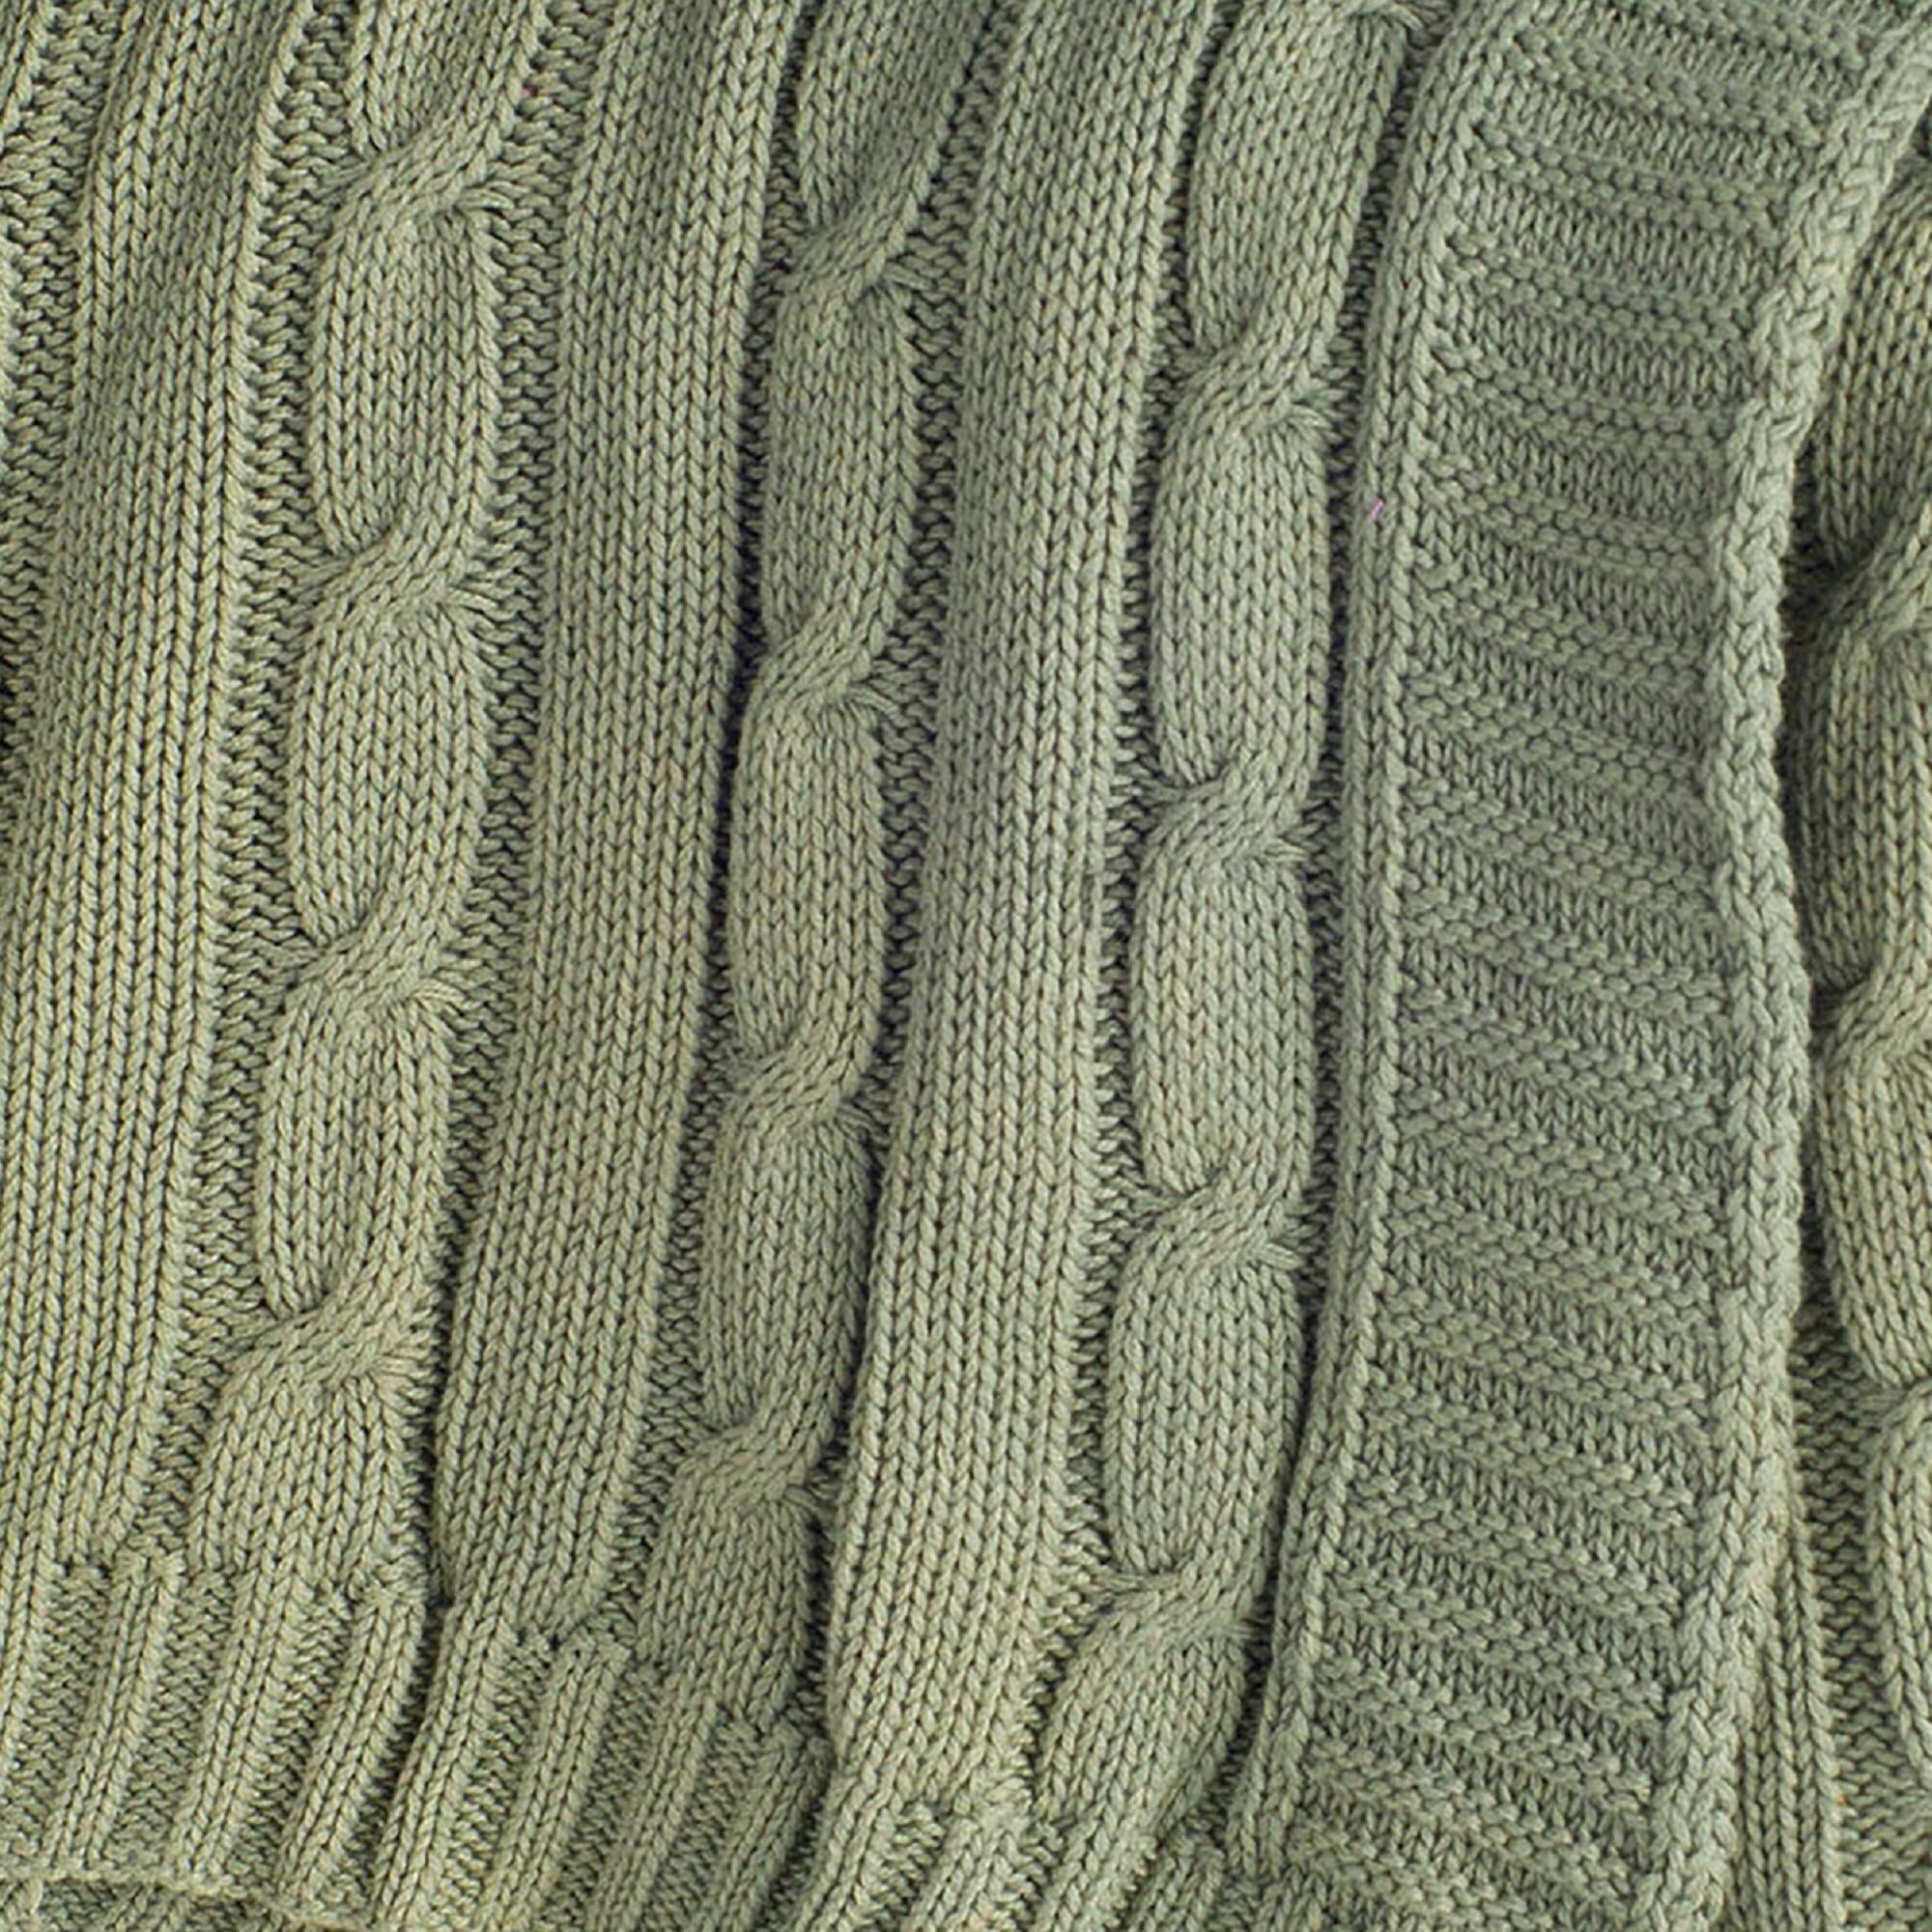 Rizzy Home Olive Green Cable Knit Throw Blanket